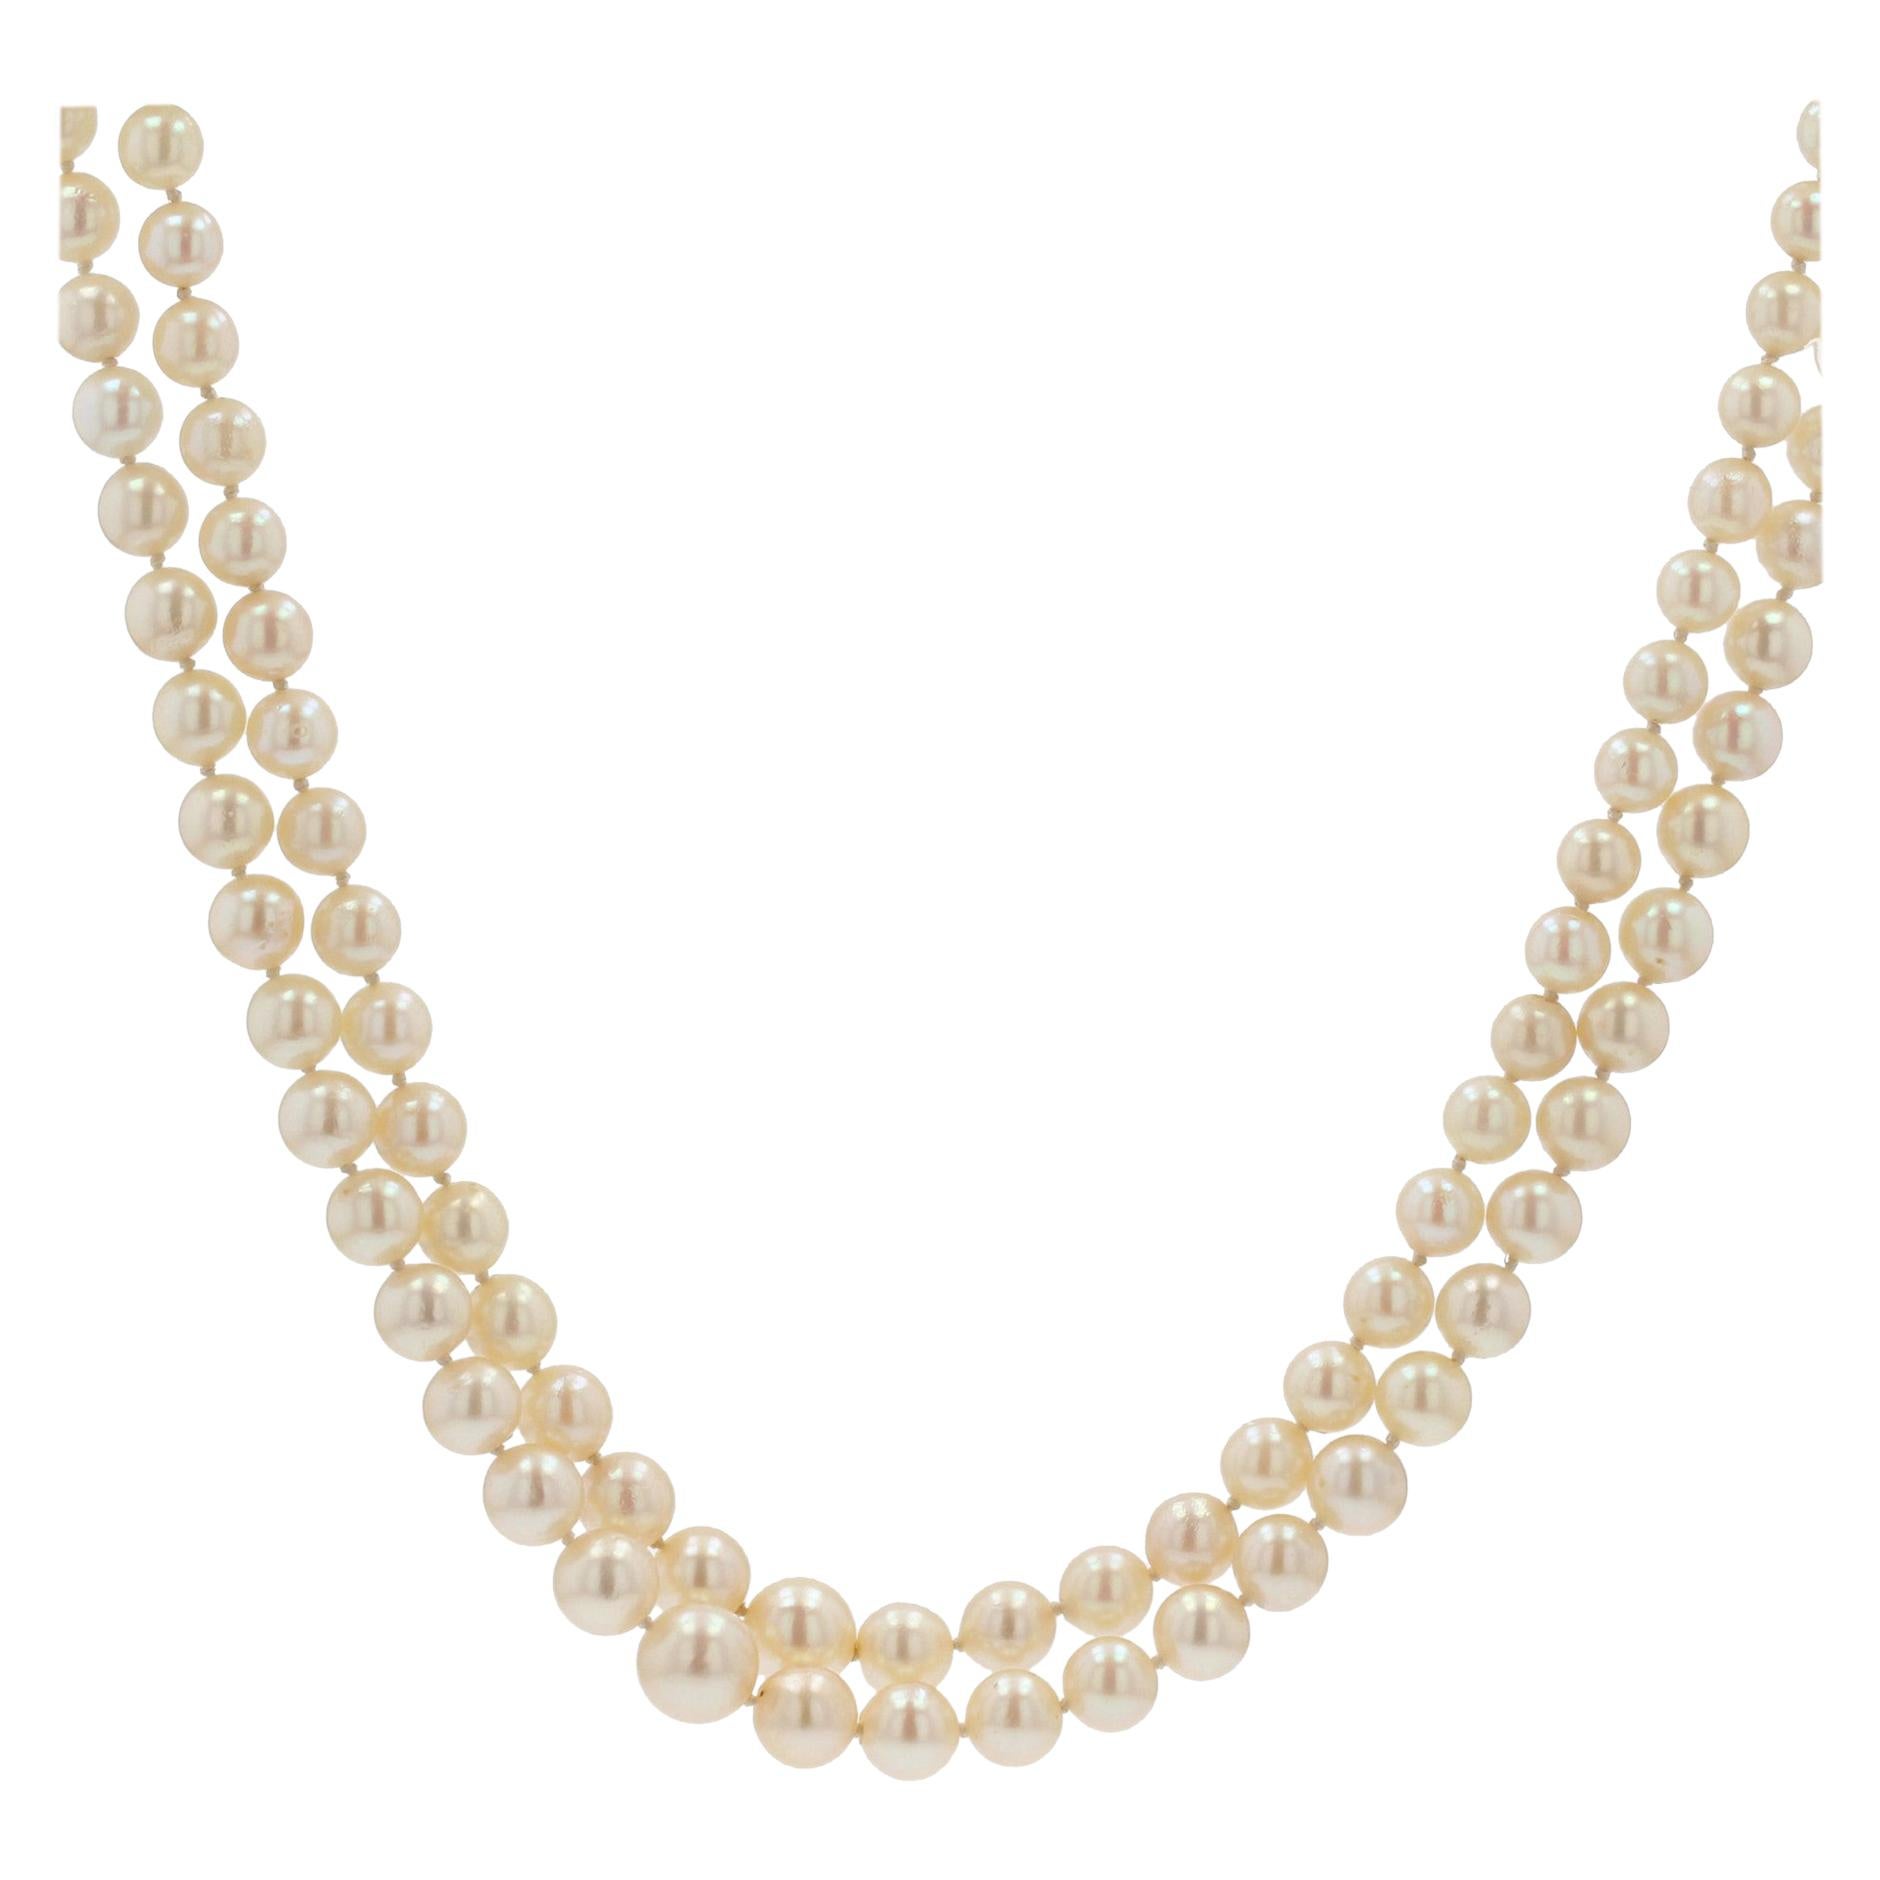 French 1950s Double Row Cultured Falling Pearl Necklace